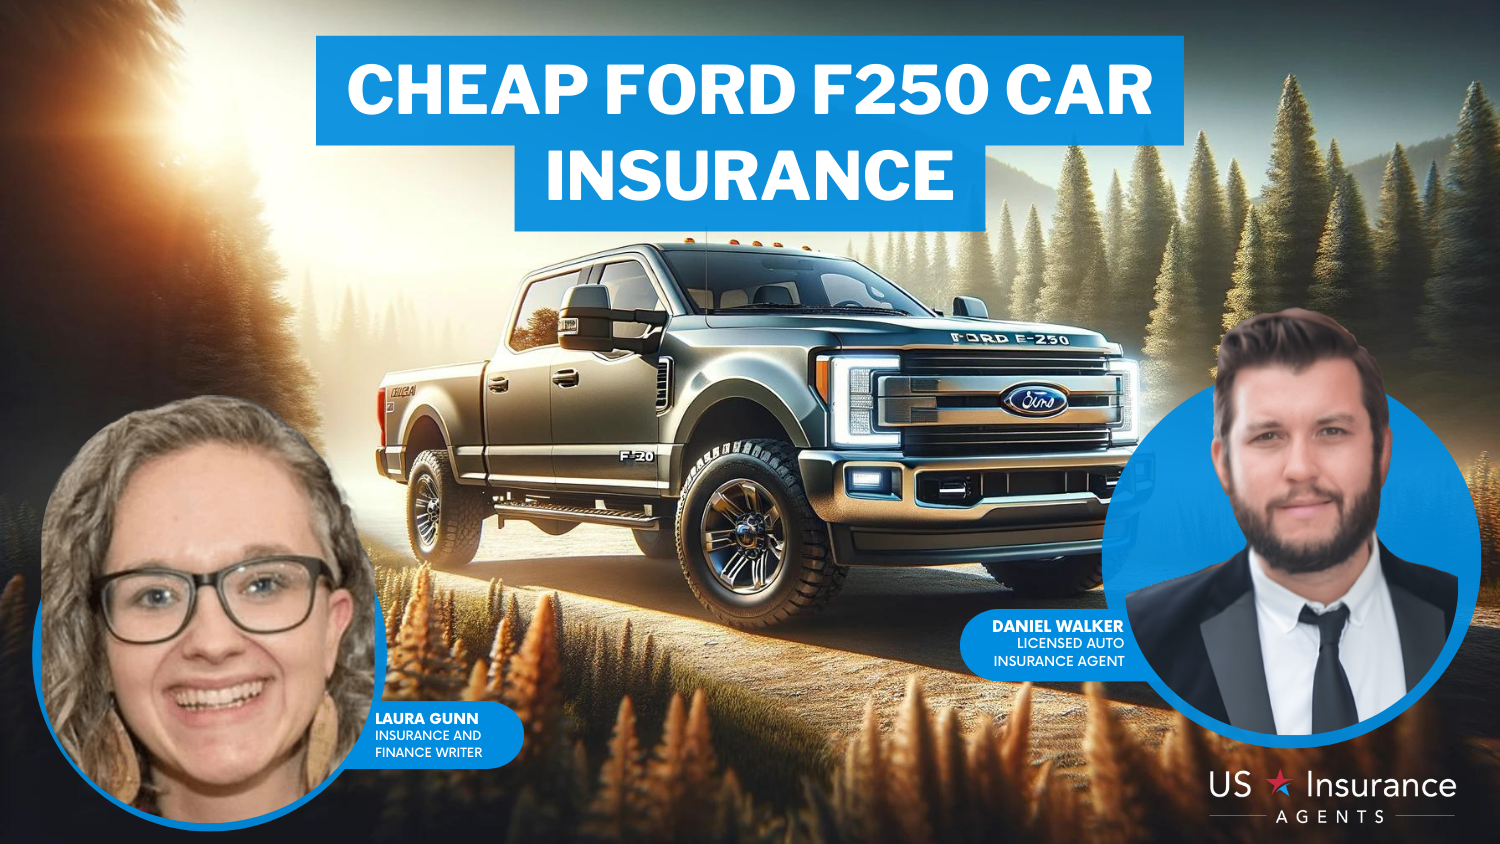 Cheap Ford F250 Car Insurance: USAA, Safeco, and AAA